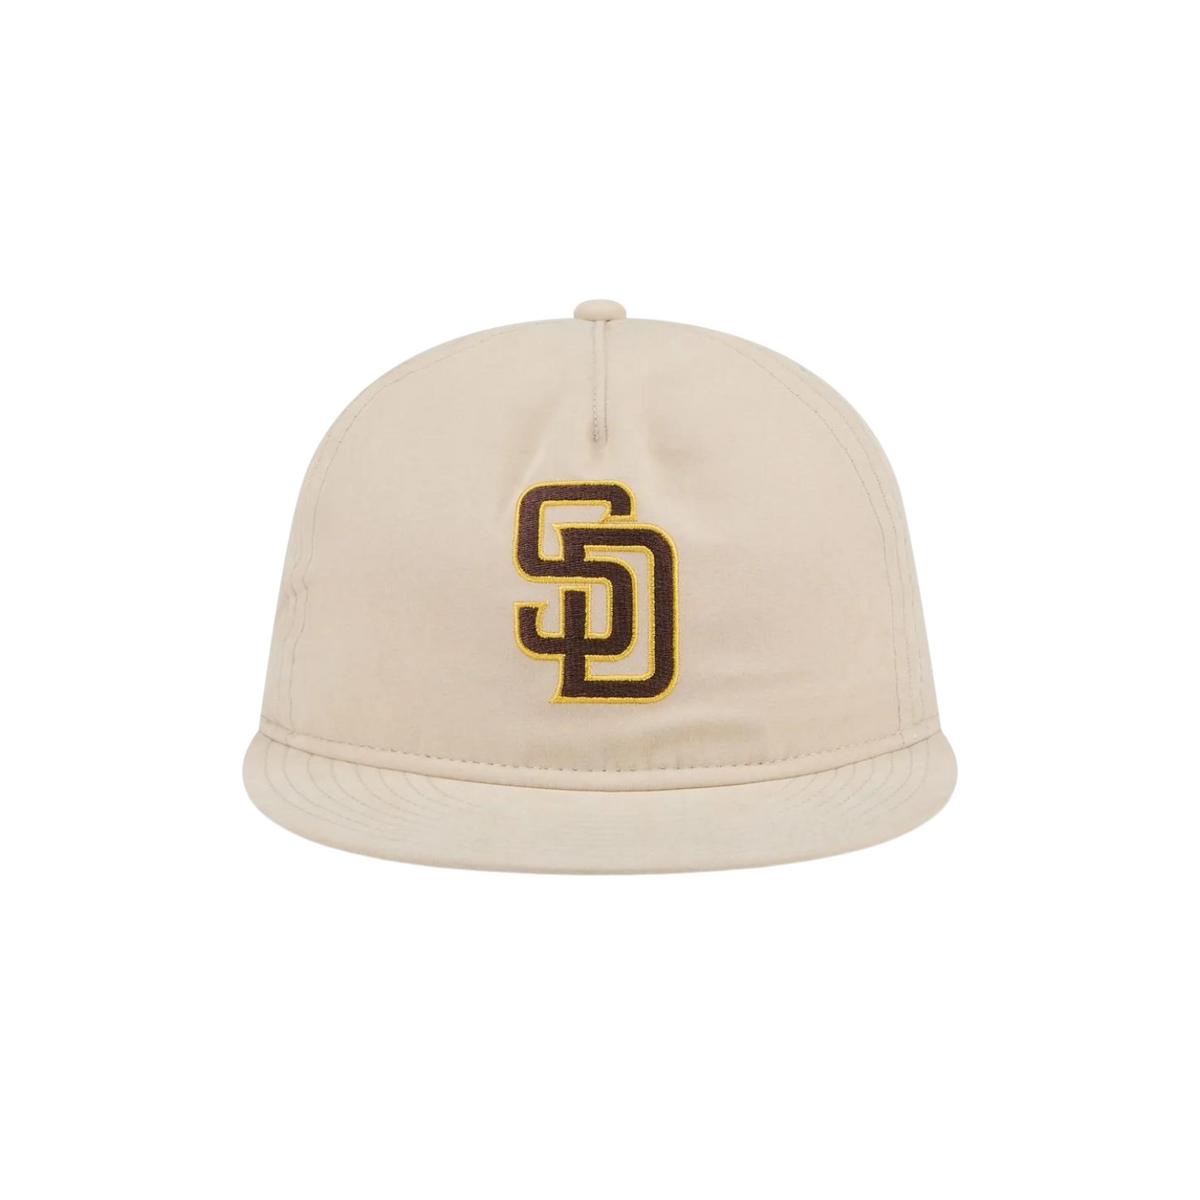 BRUSHED NYLON 9FIFTY RETRO CROWN A-FRAME - SAN DIEGO PADRES (STONE)